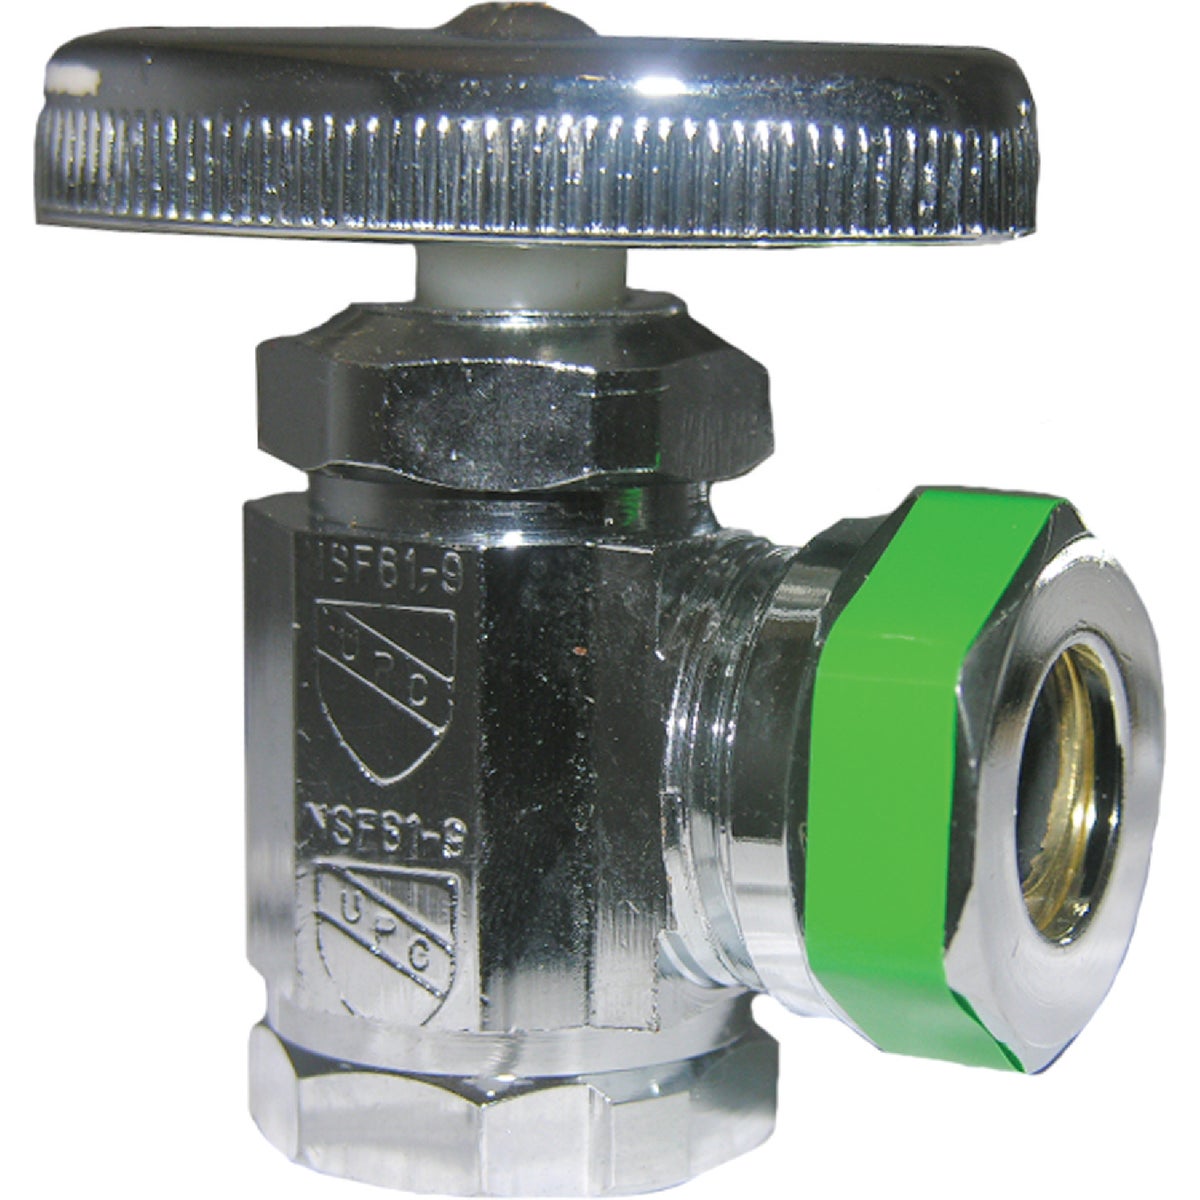 Lasco 1/2 In. FIP Inlet x 1/2 In. -7/16 In. IP Outlet Multi-Turn Style Angle Valve